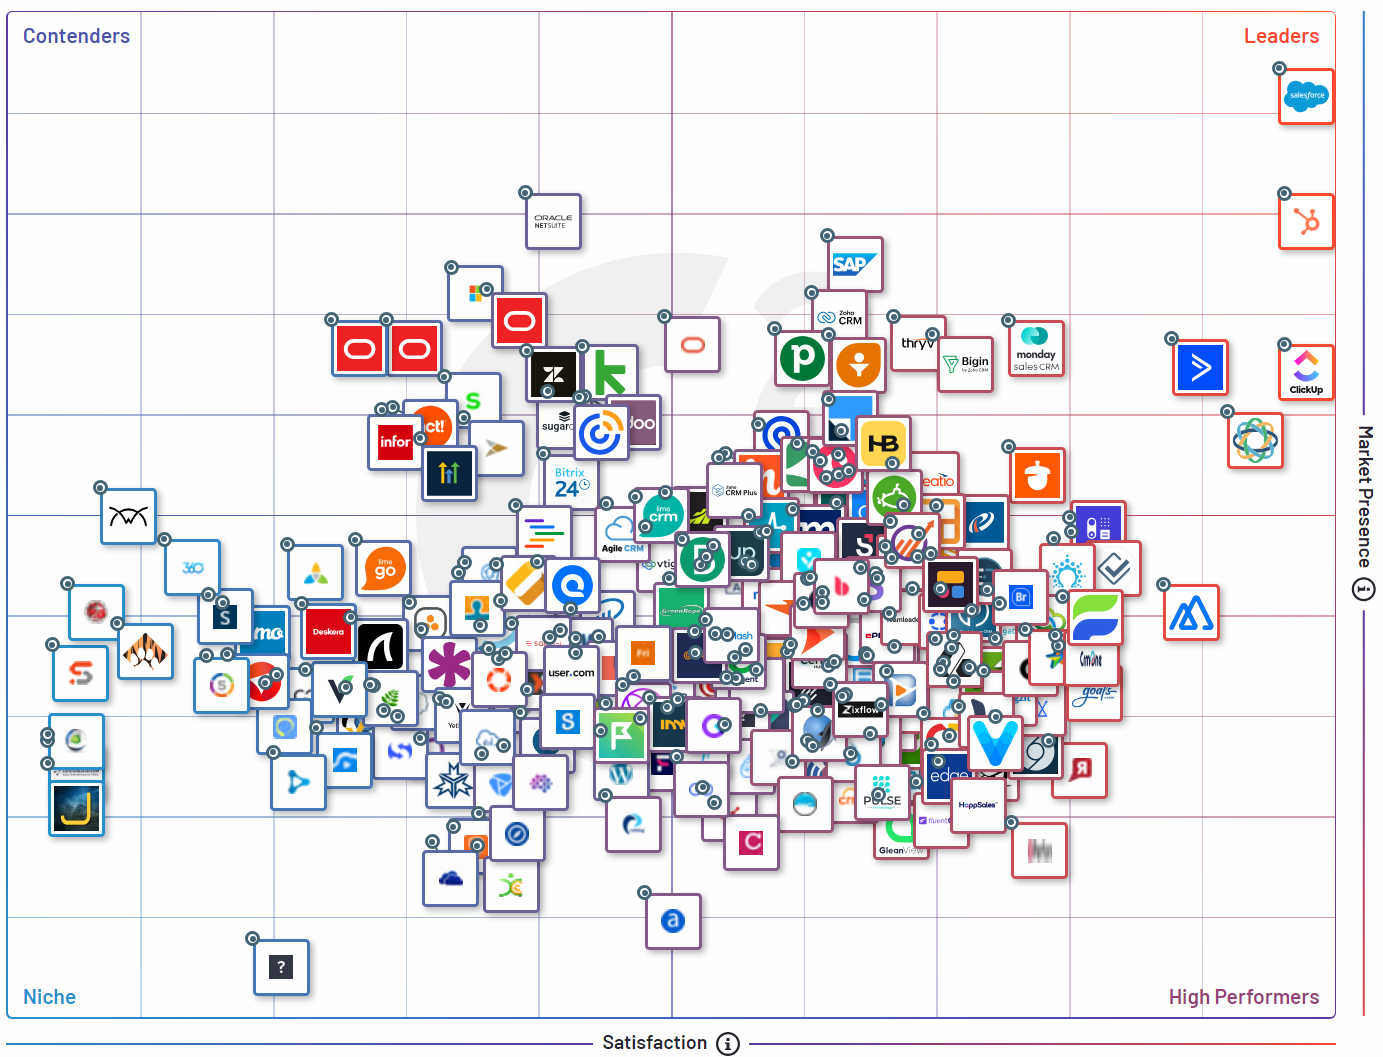 G2 grid showing the leading companies in the CRM space.